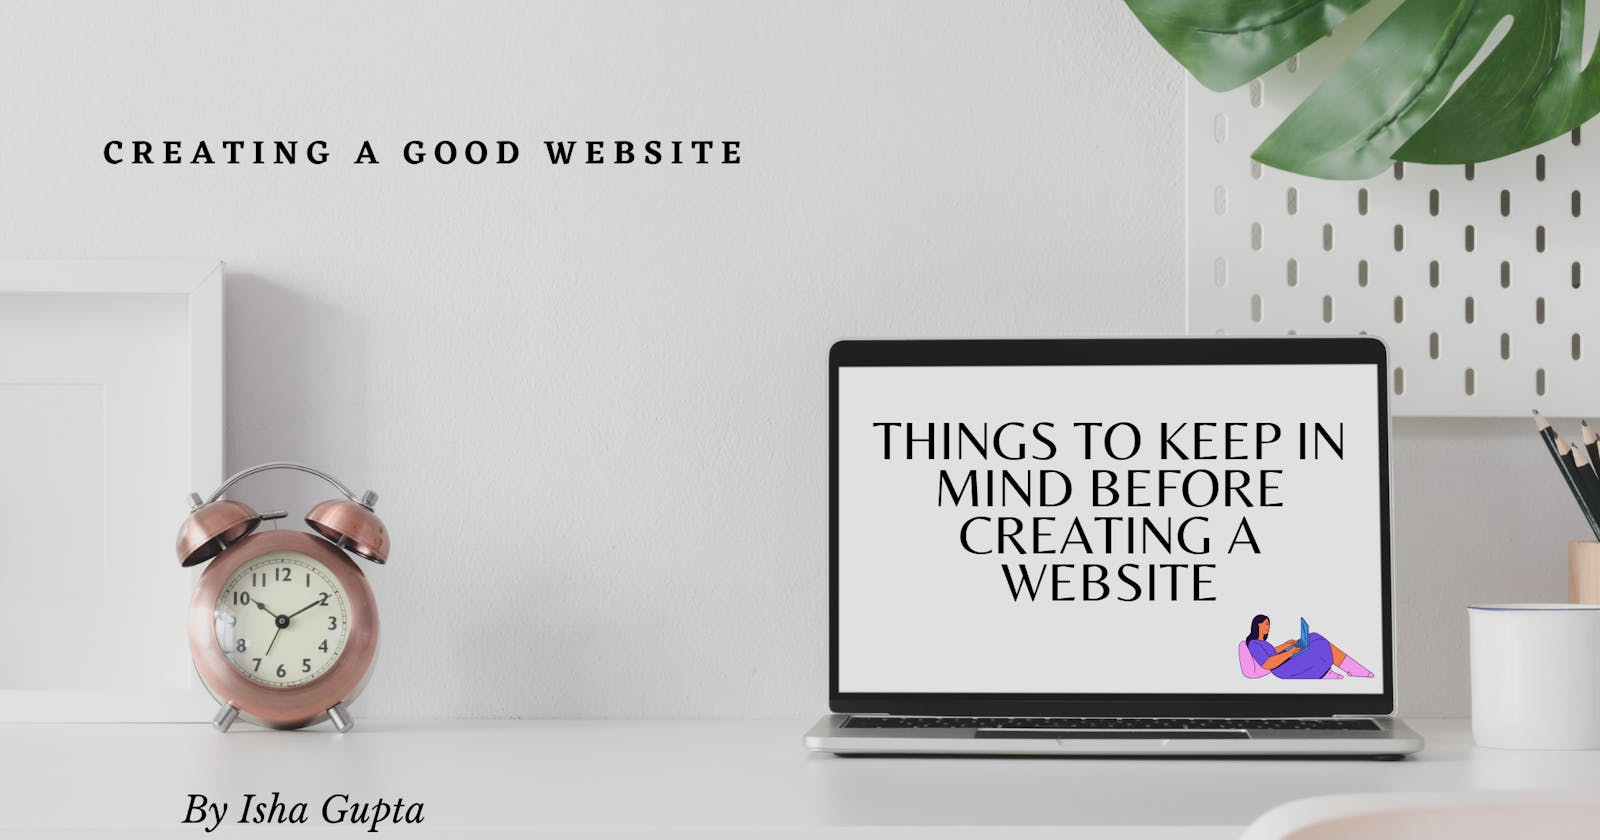 Things to keep in mind before creating a website...